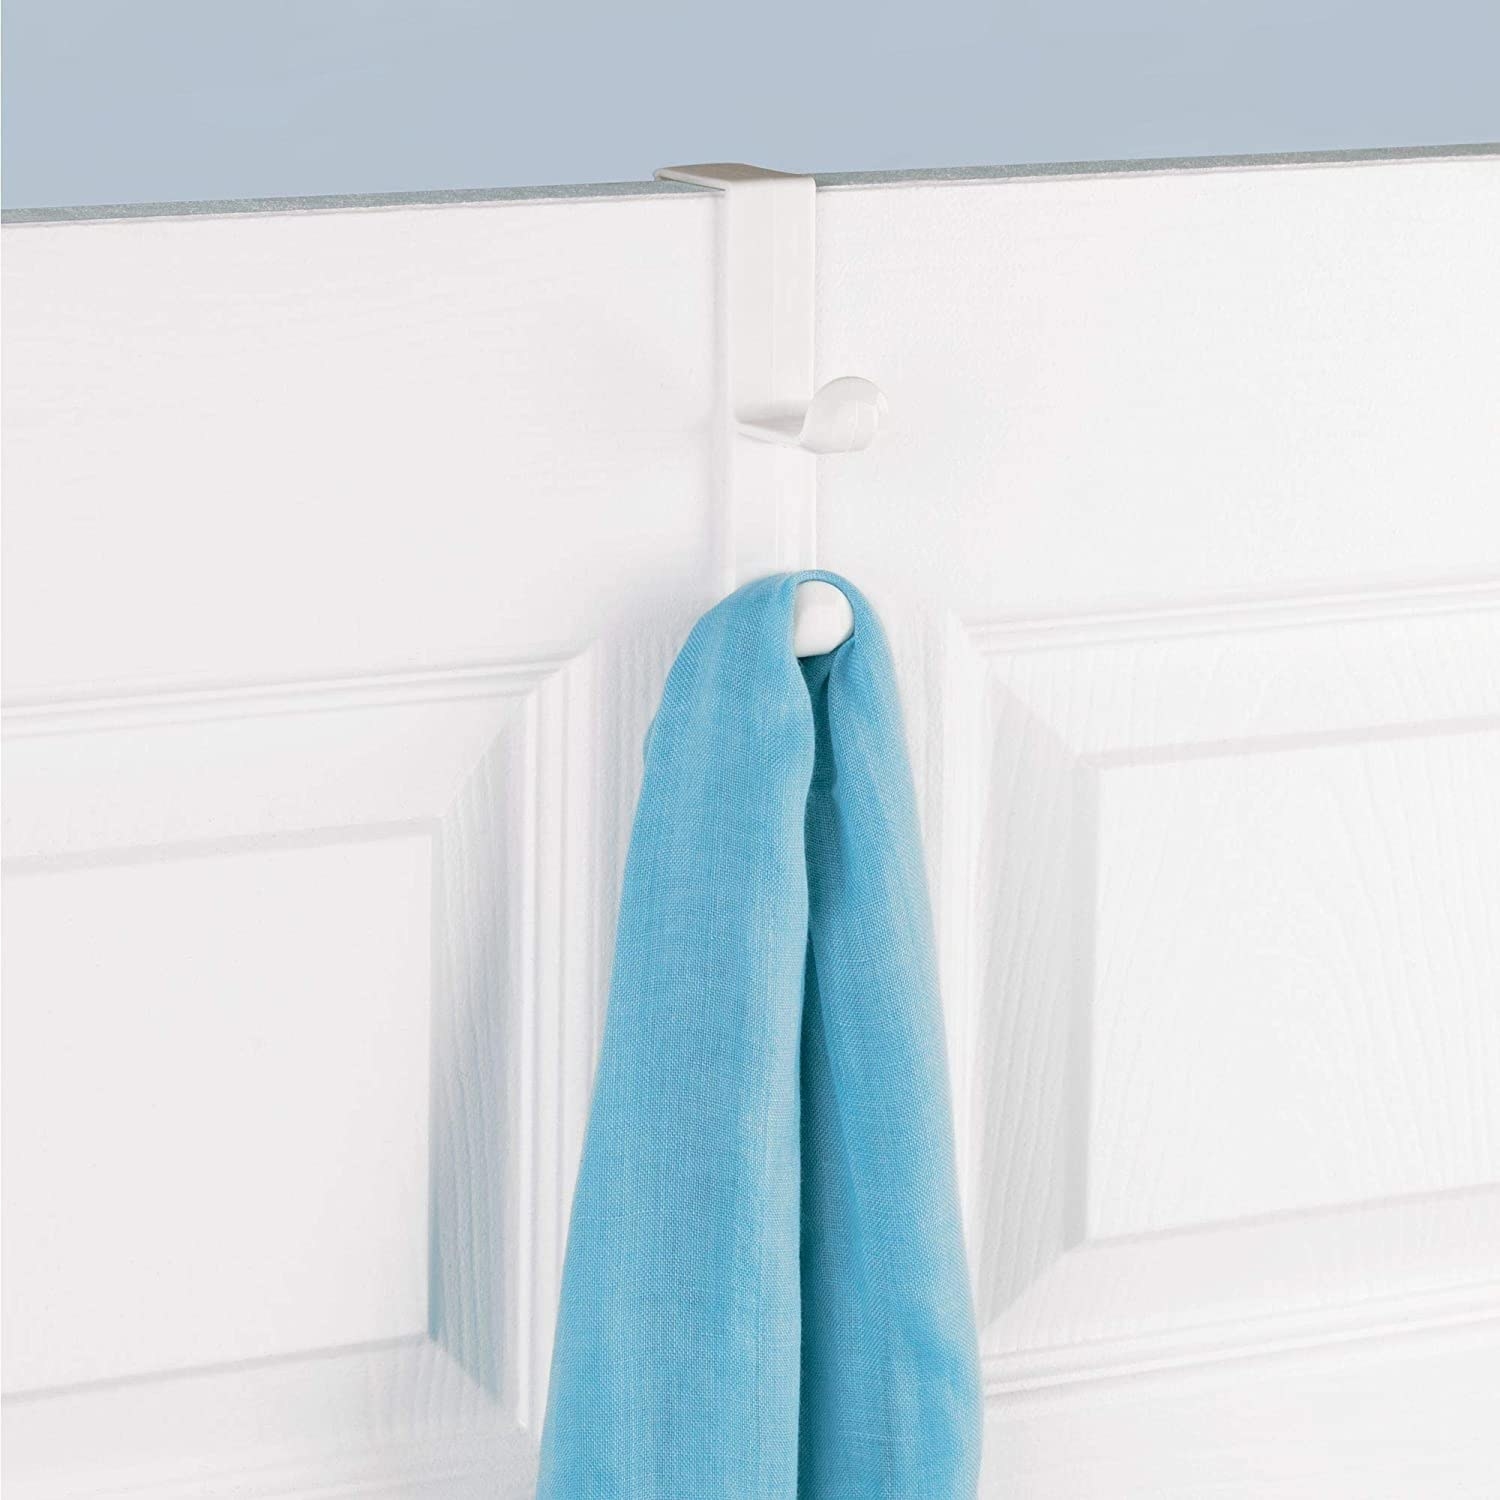 the hook over a door with a towel on it